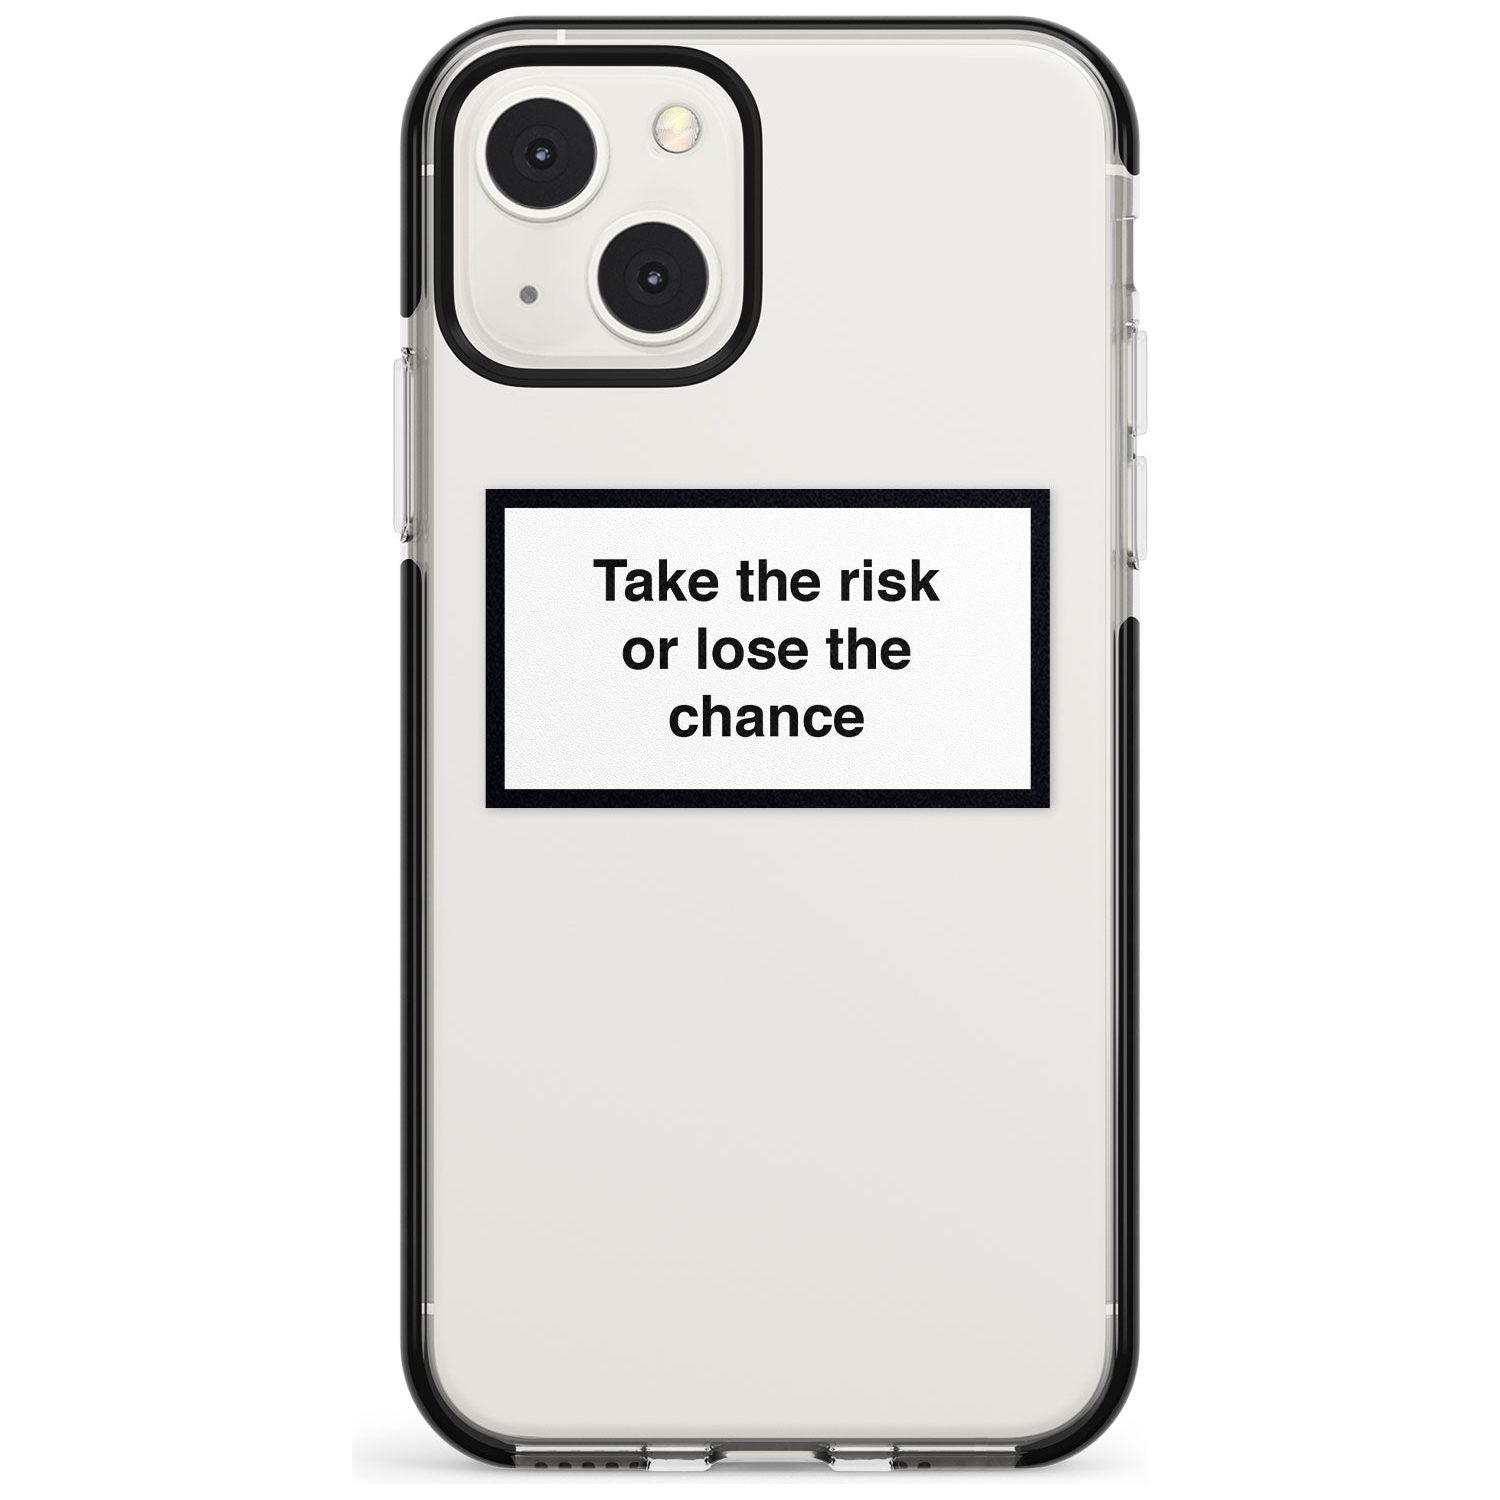 Take the risk or lose the chance